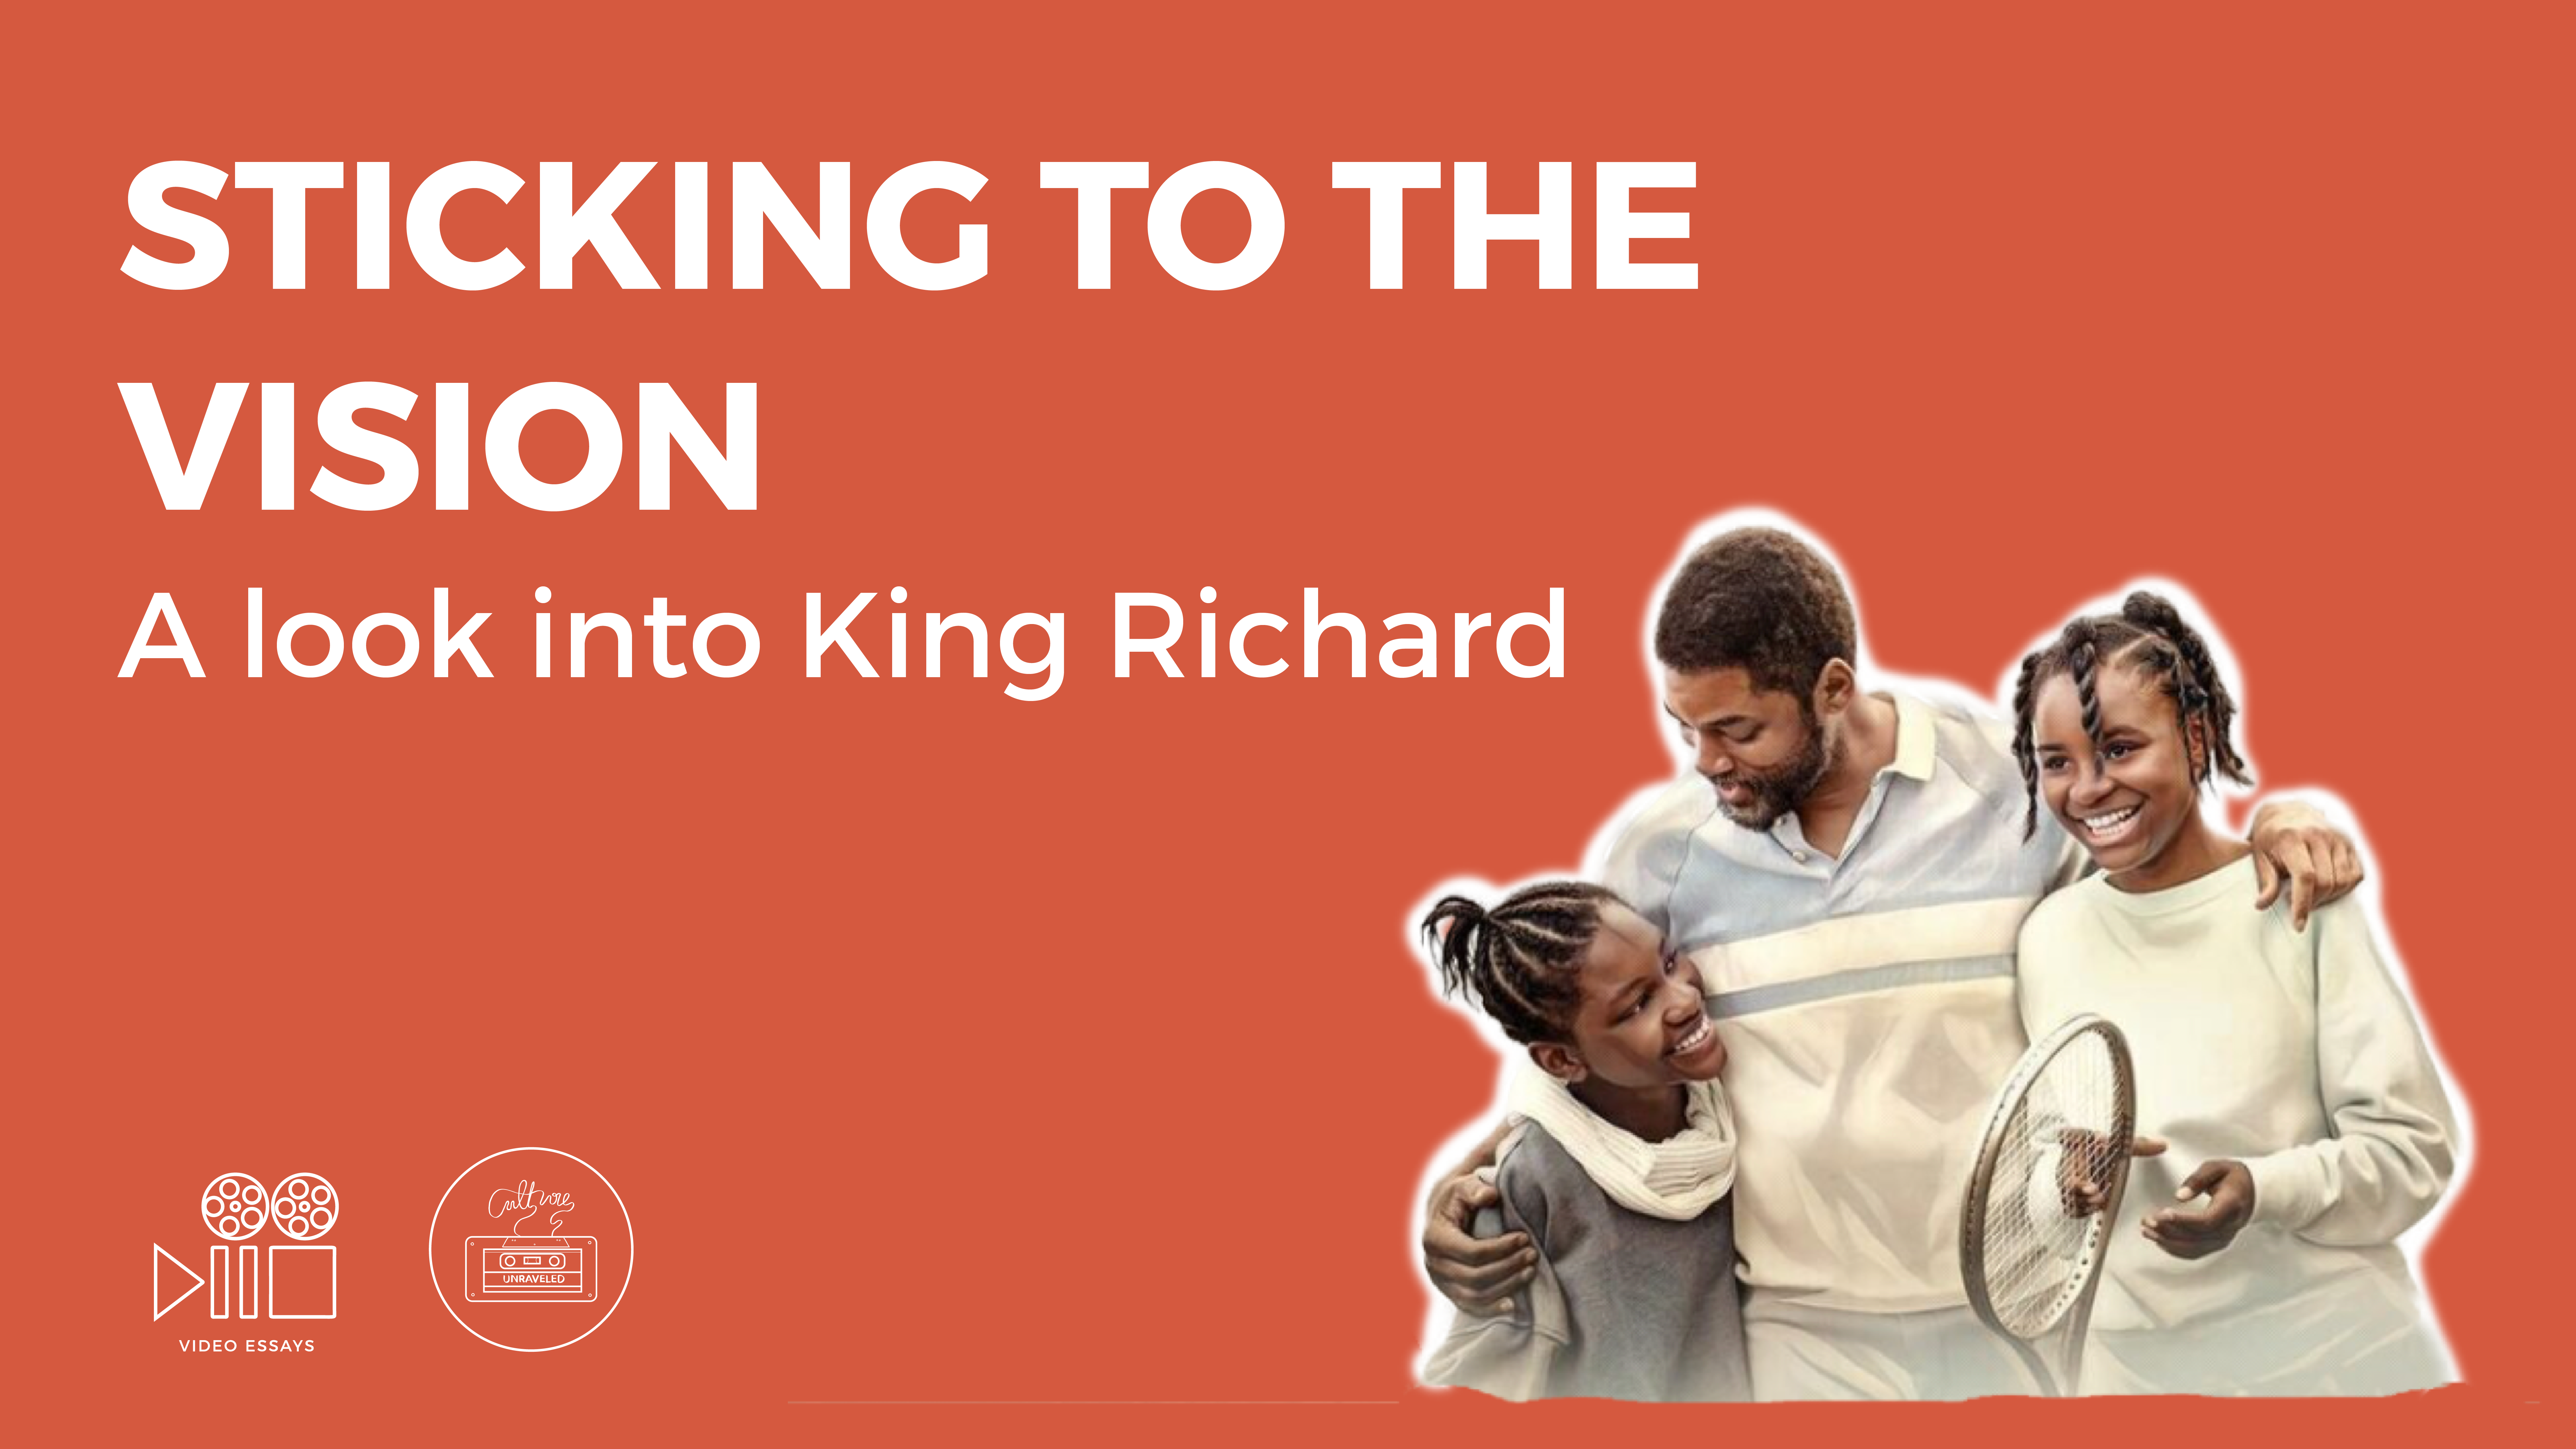 Sticking to the Vision. A Look into King Richard